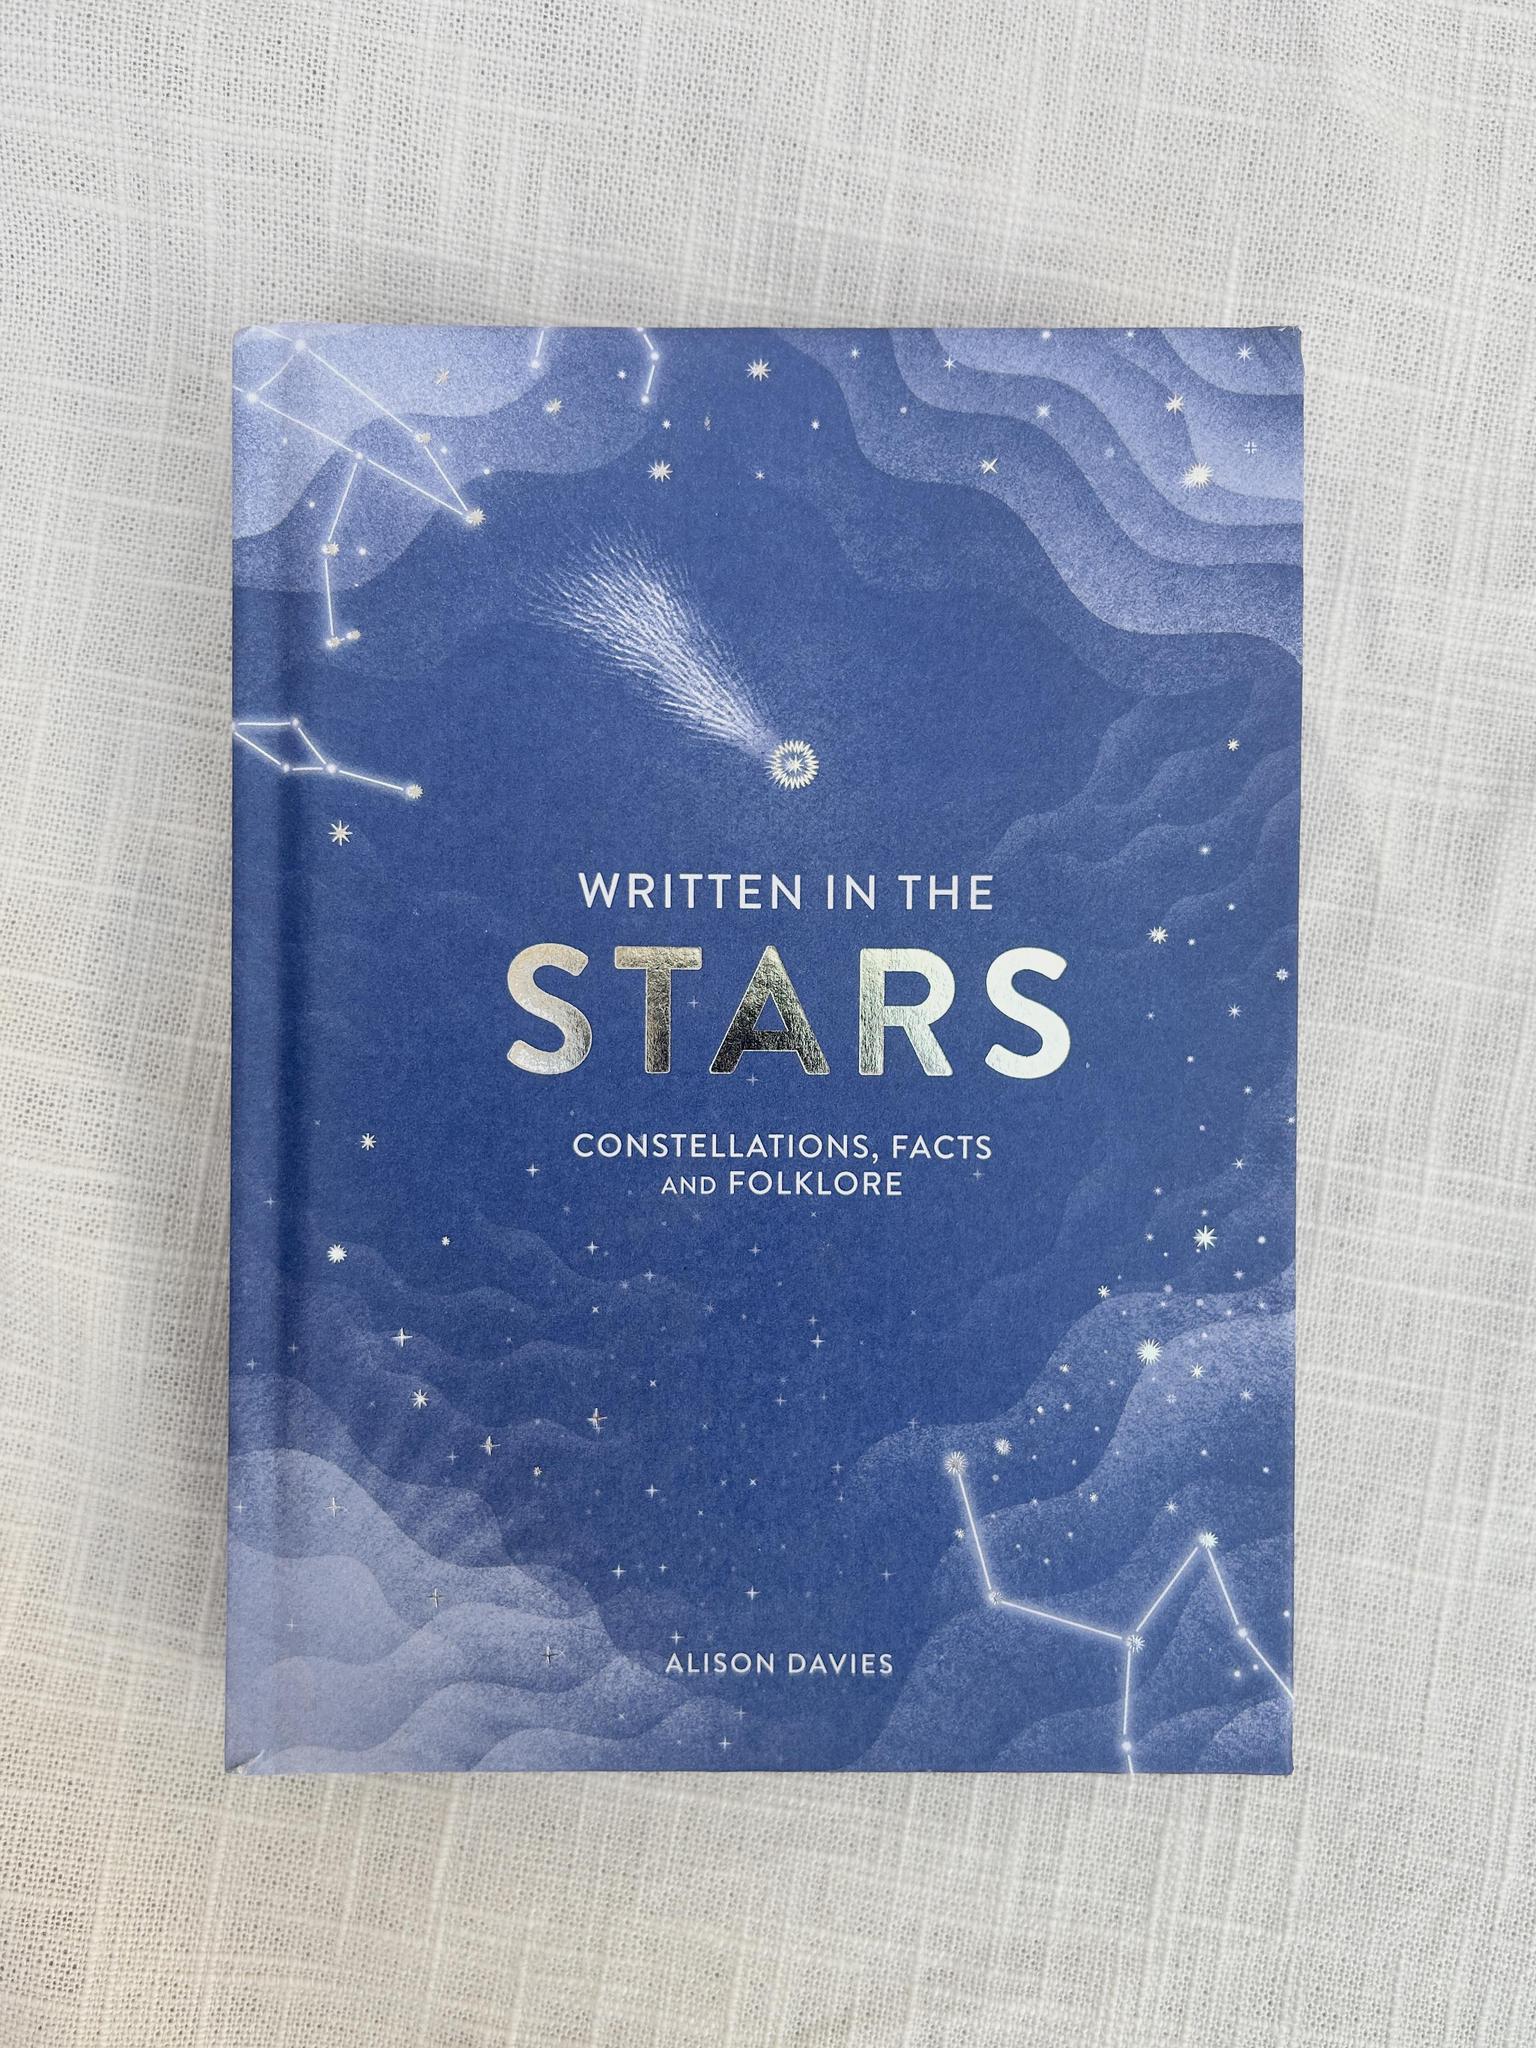 Written In The Stars book: constellations, facts, and folklore